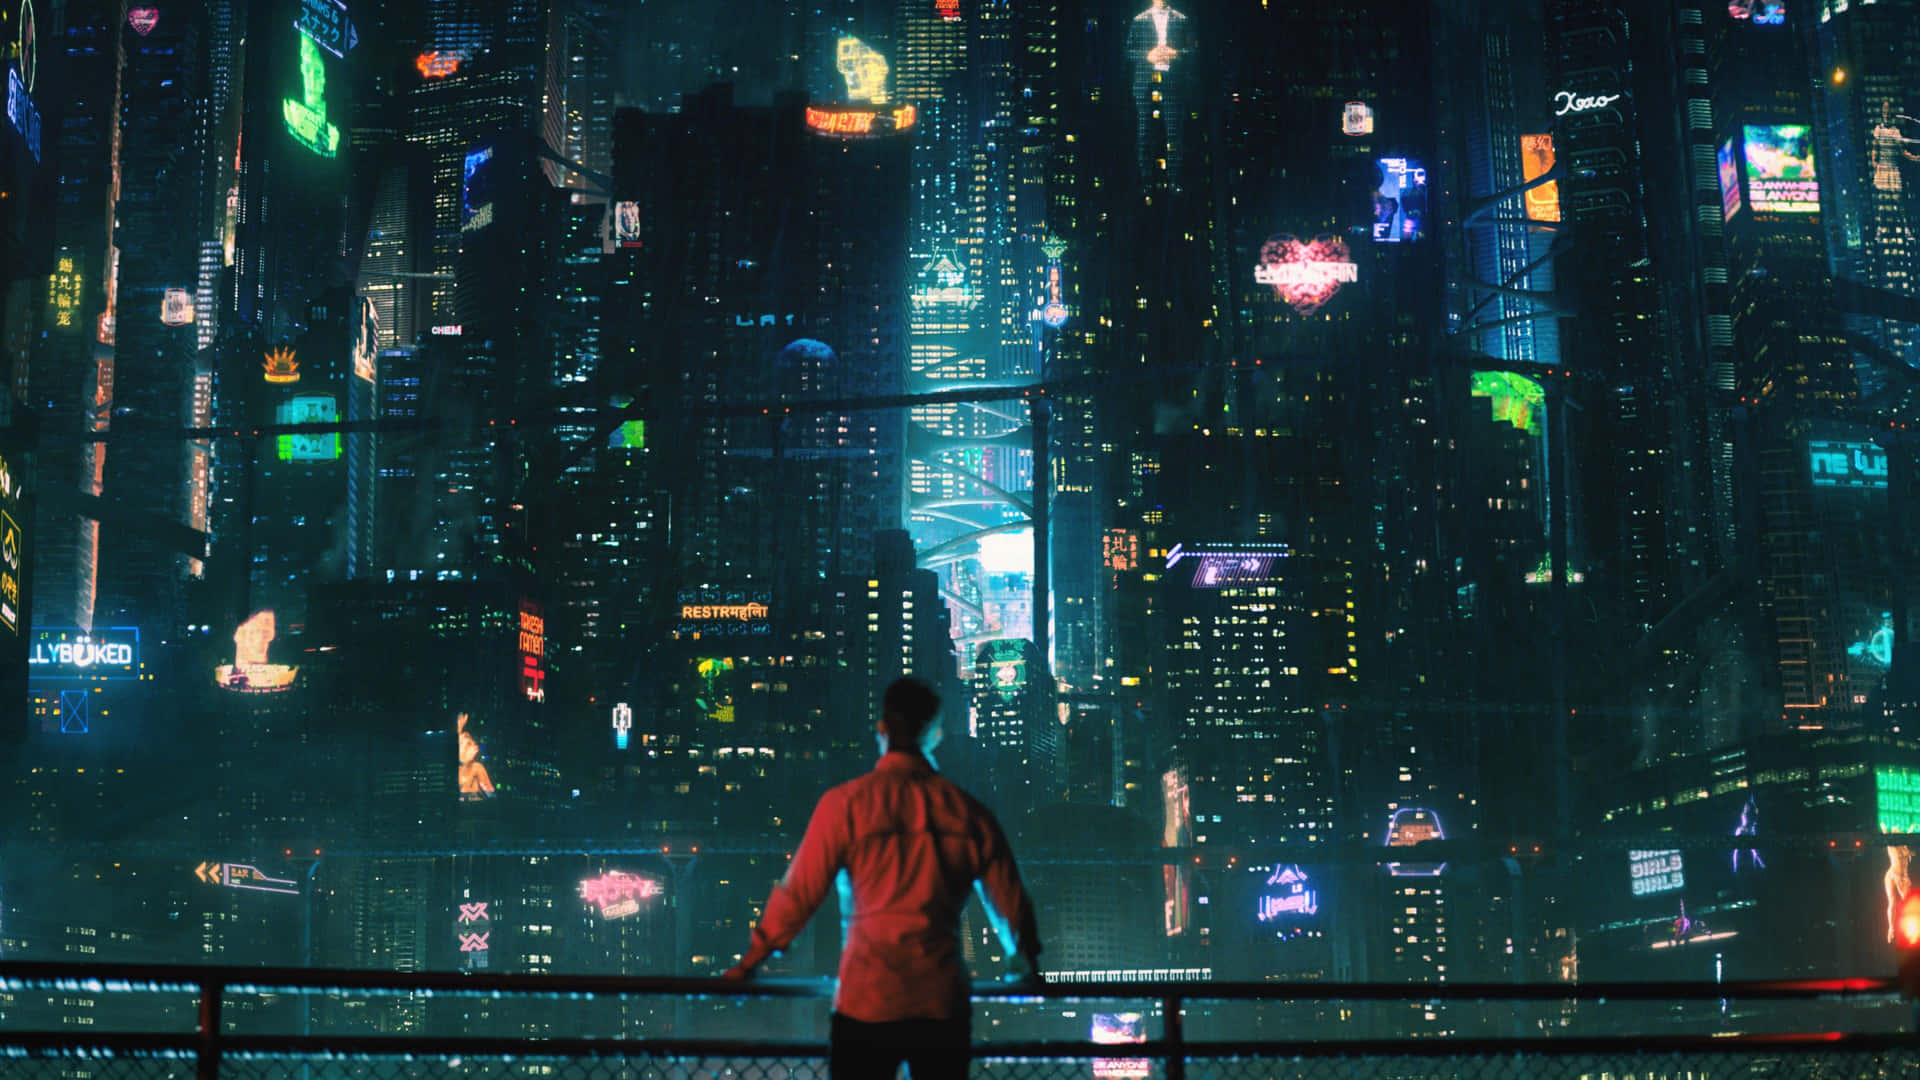 Discover the Nightlife of Cyberpunk City